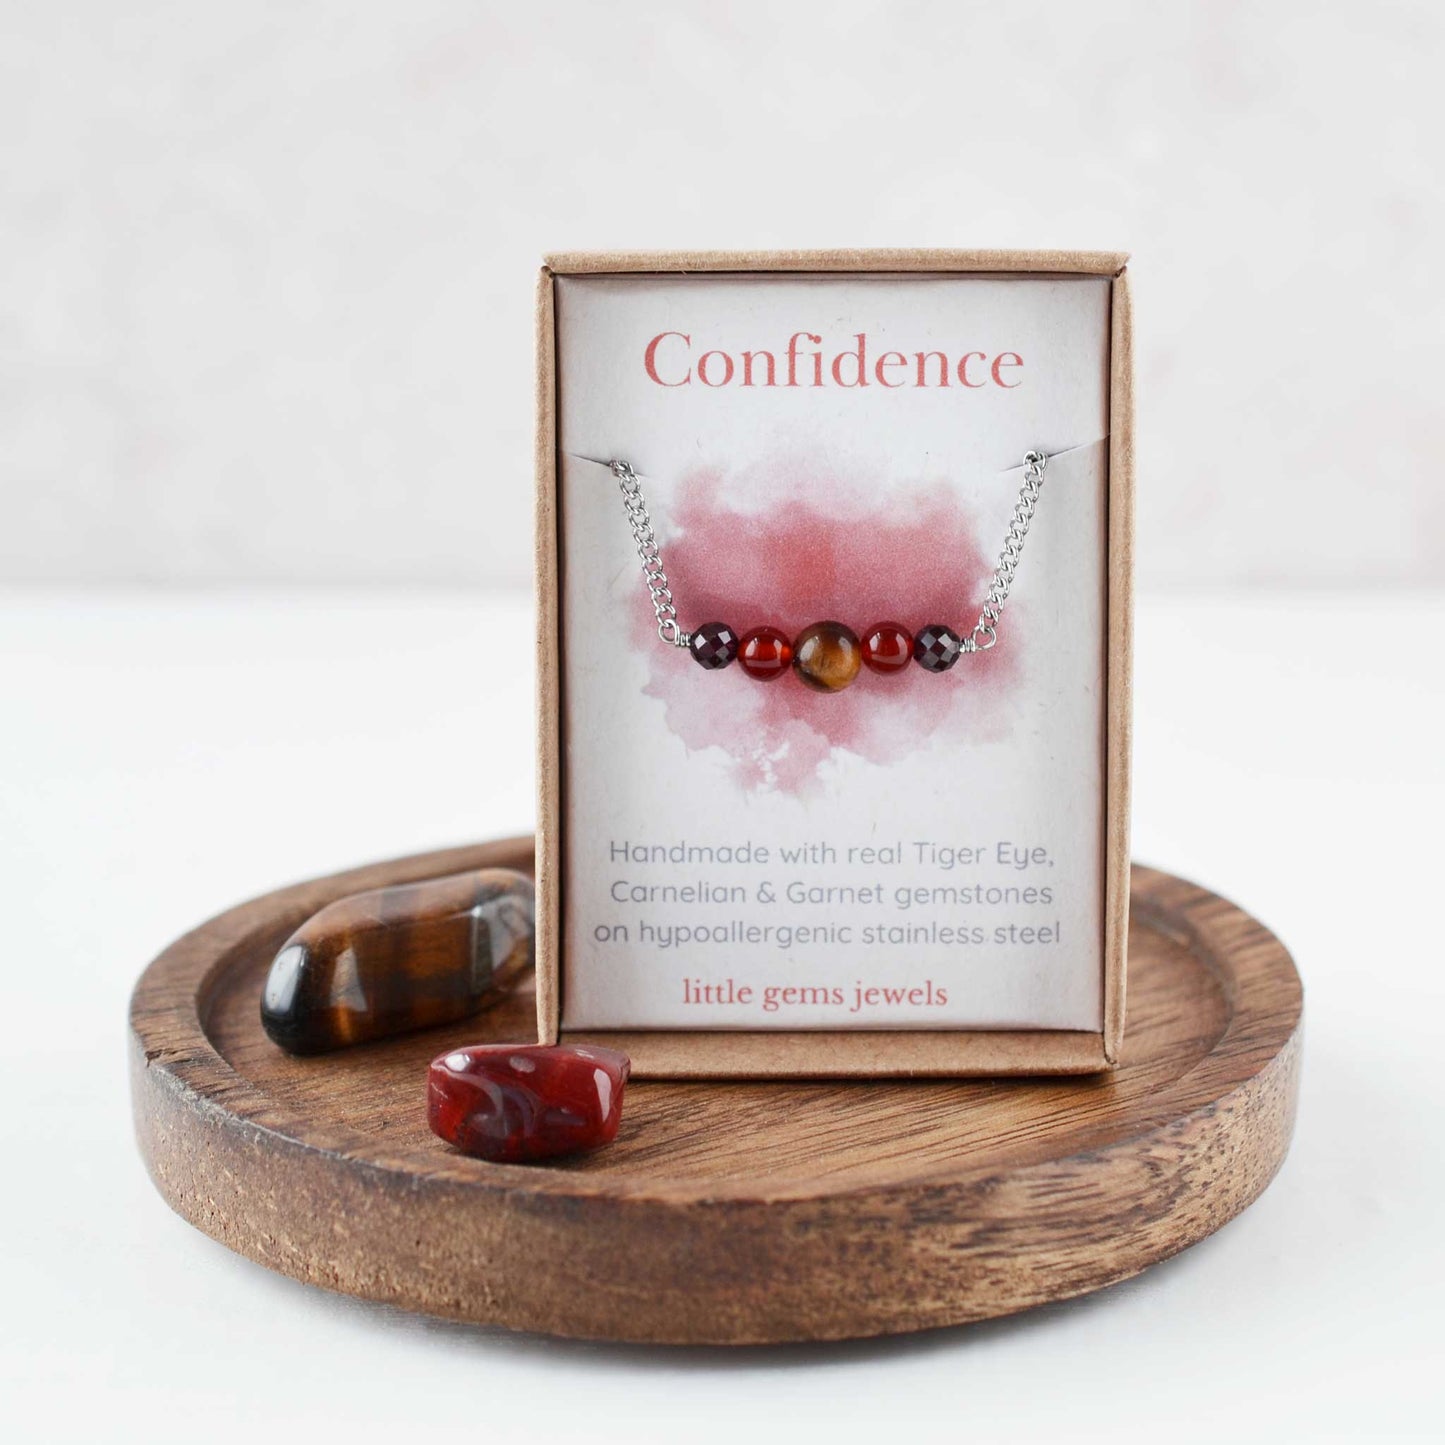 Gemstones for confidence necklace in eco friendly gift box